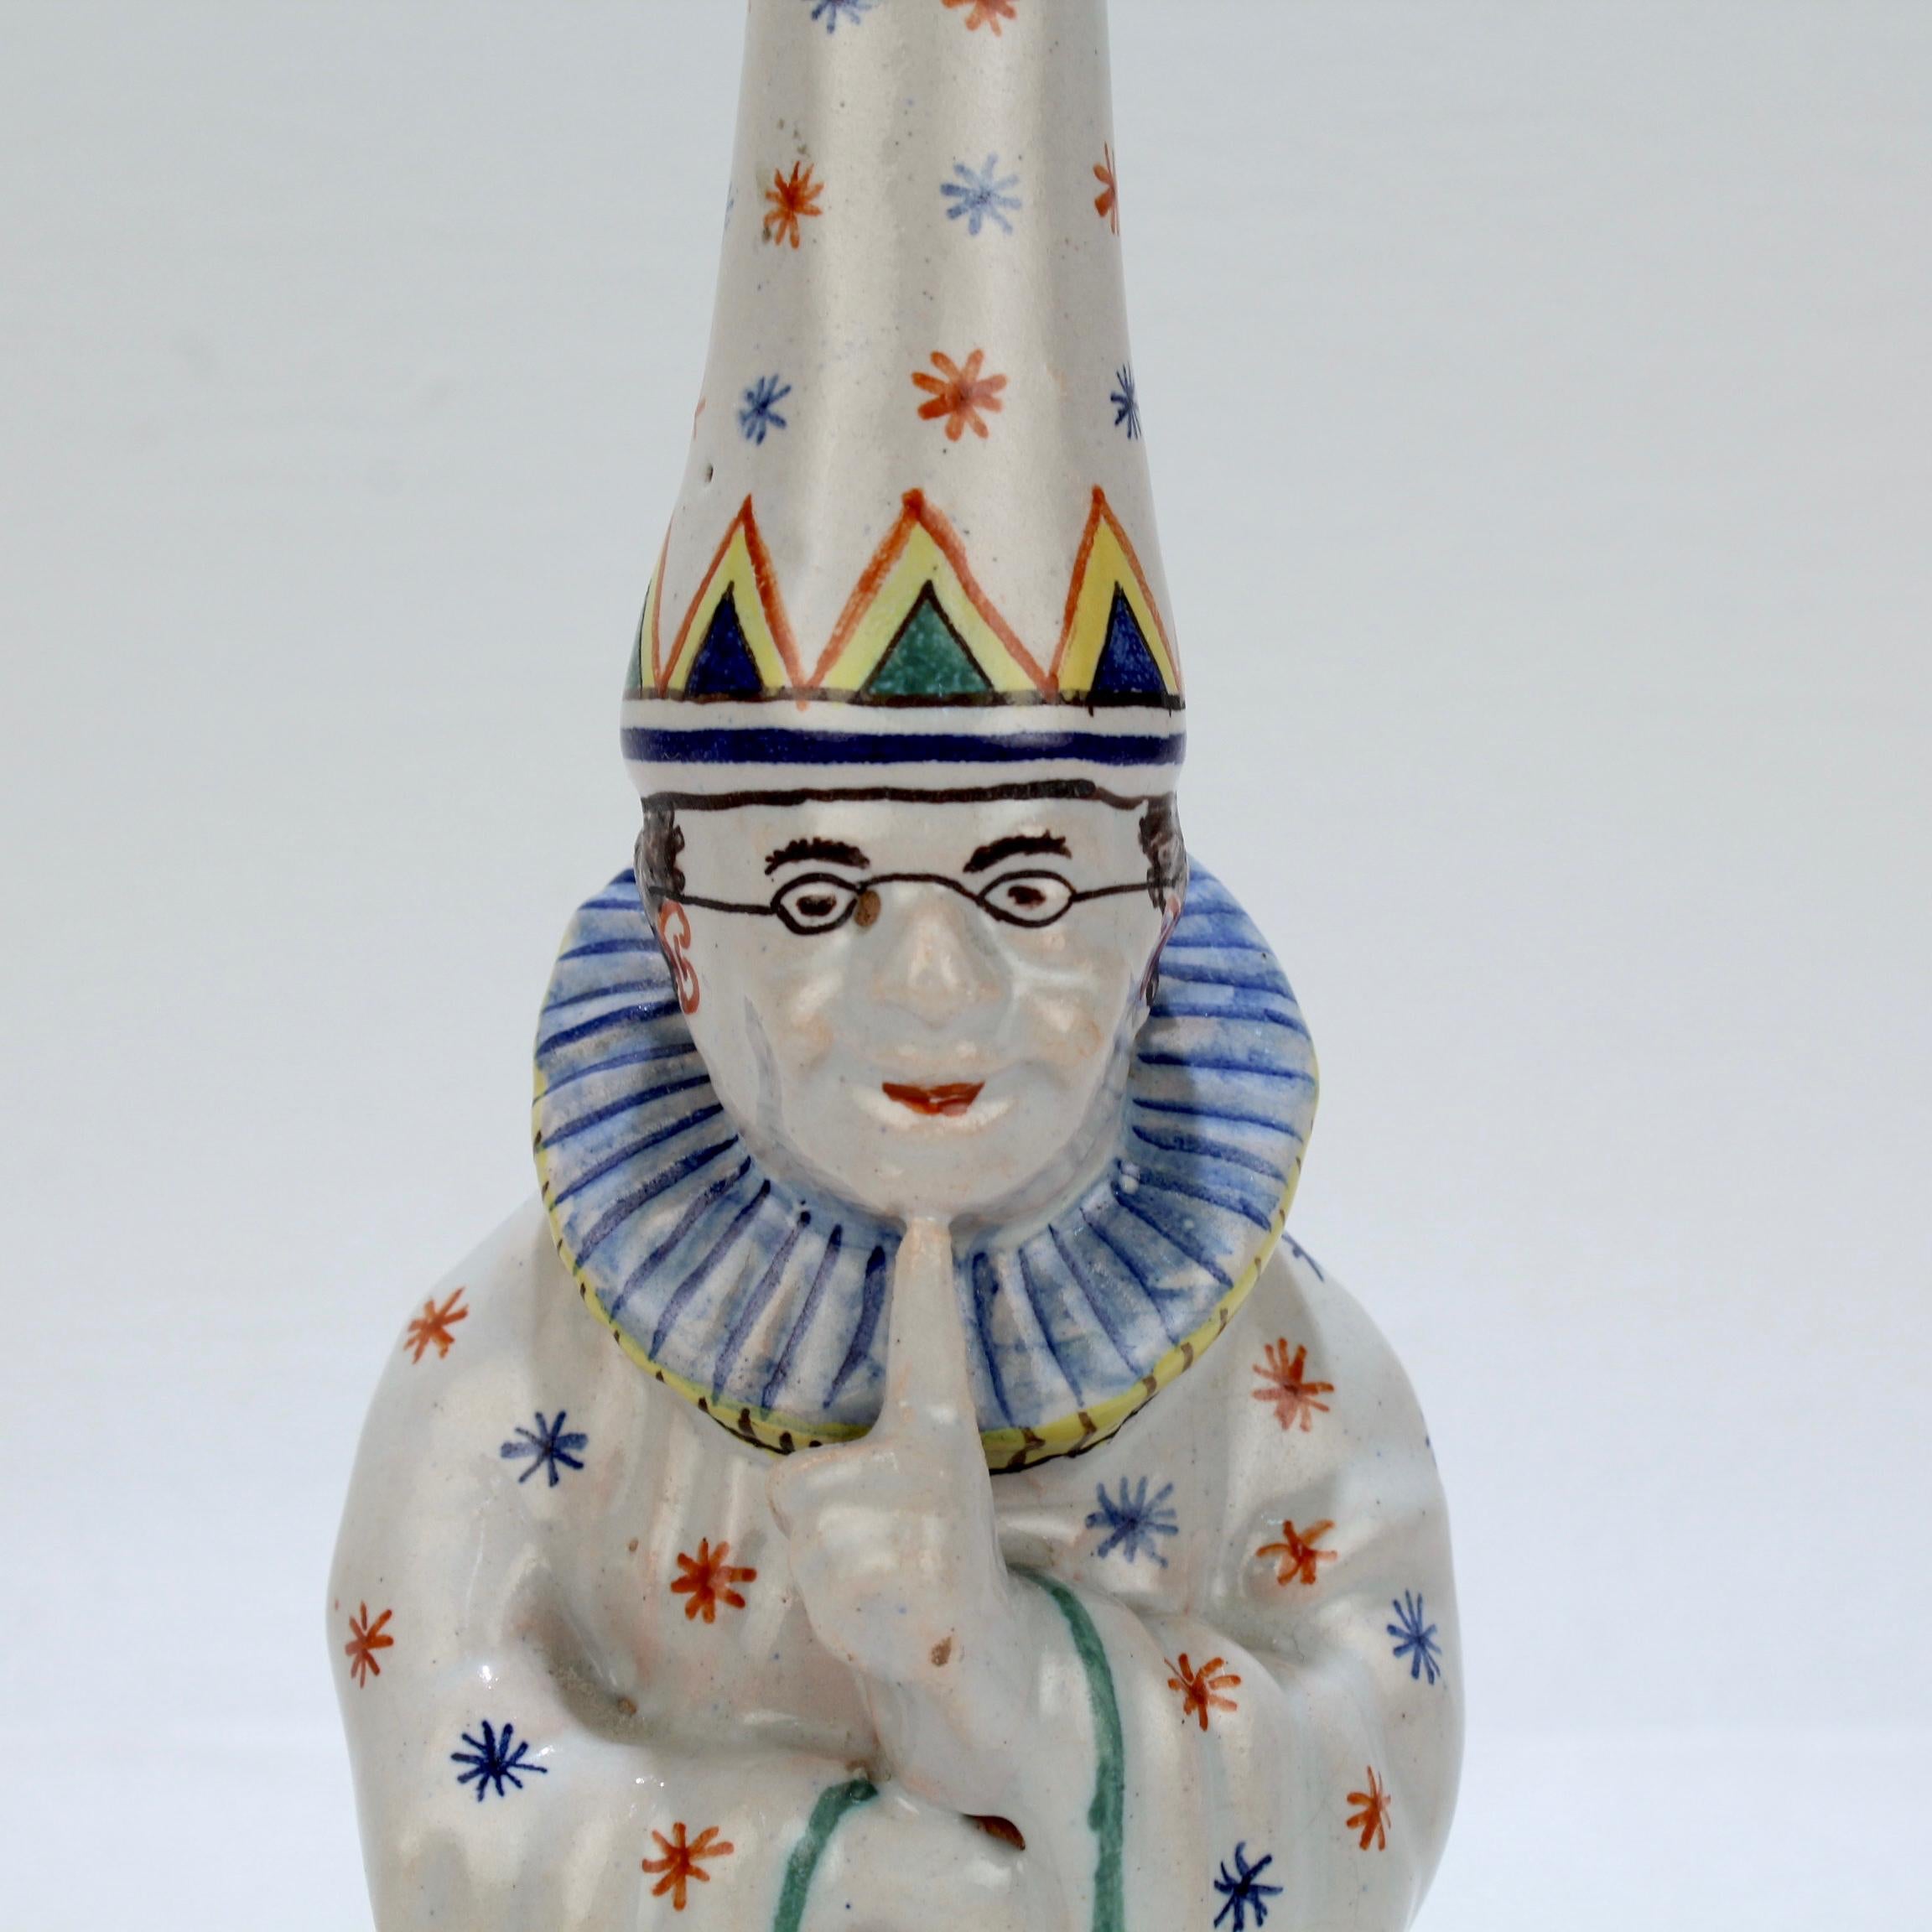 A wonderfully whimsical, figural Desvres faience bell.

In the form of a wizard with splayed clock and wizard's hat shushing the room.

Marked for the Charles Fourmaintraux Courquin factory in underglaze blue.

A truly fun piece of